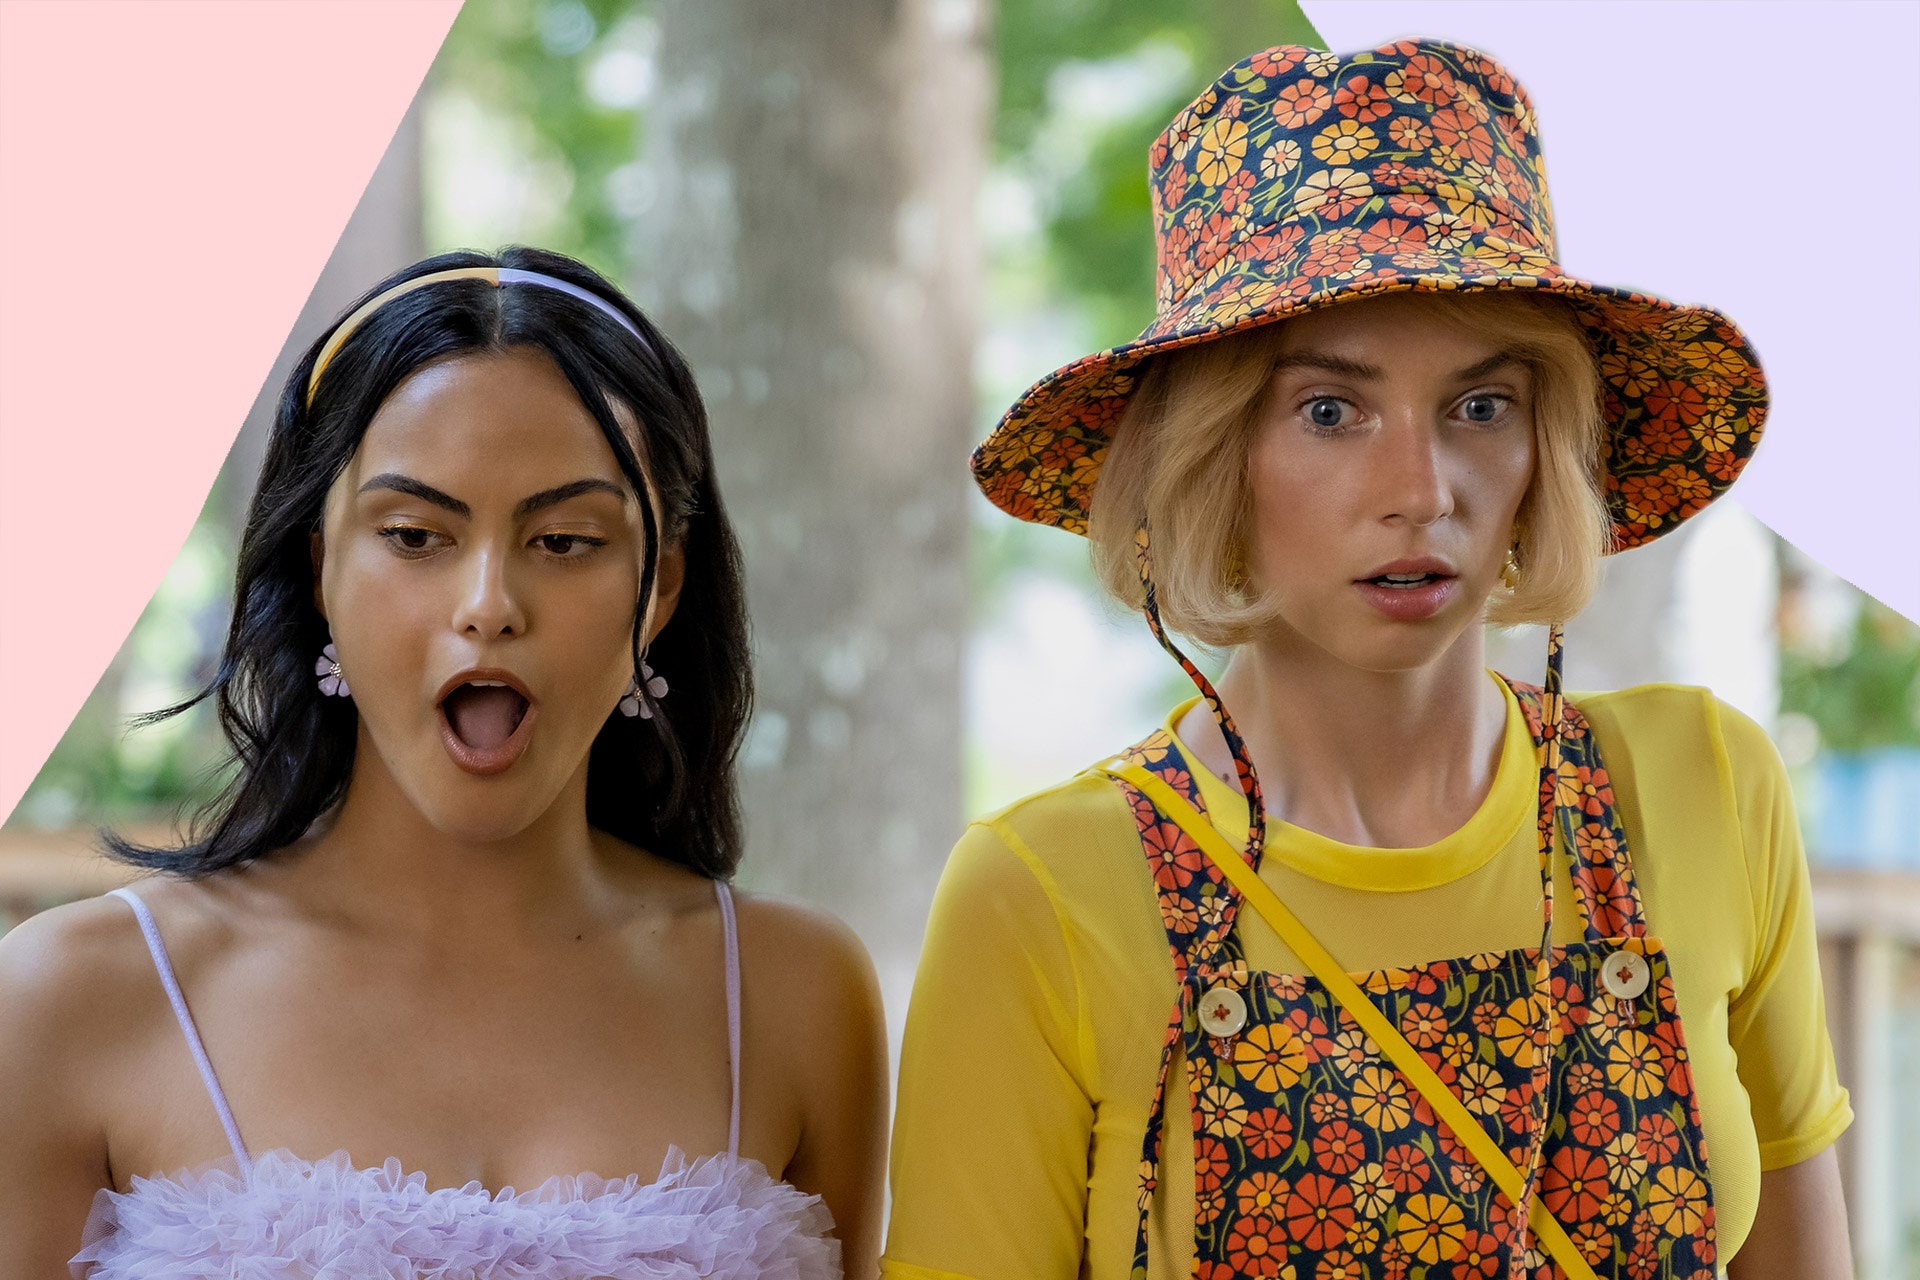 Do Revenge: Maya Hawke and Camila Mendes team up in official trailer for dark teen comedy